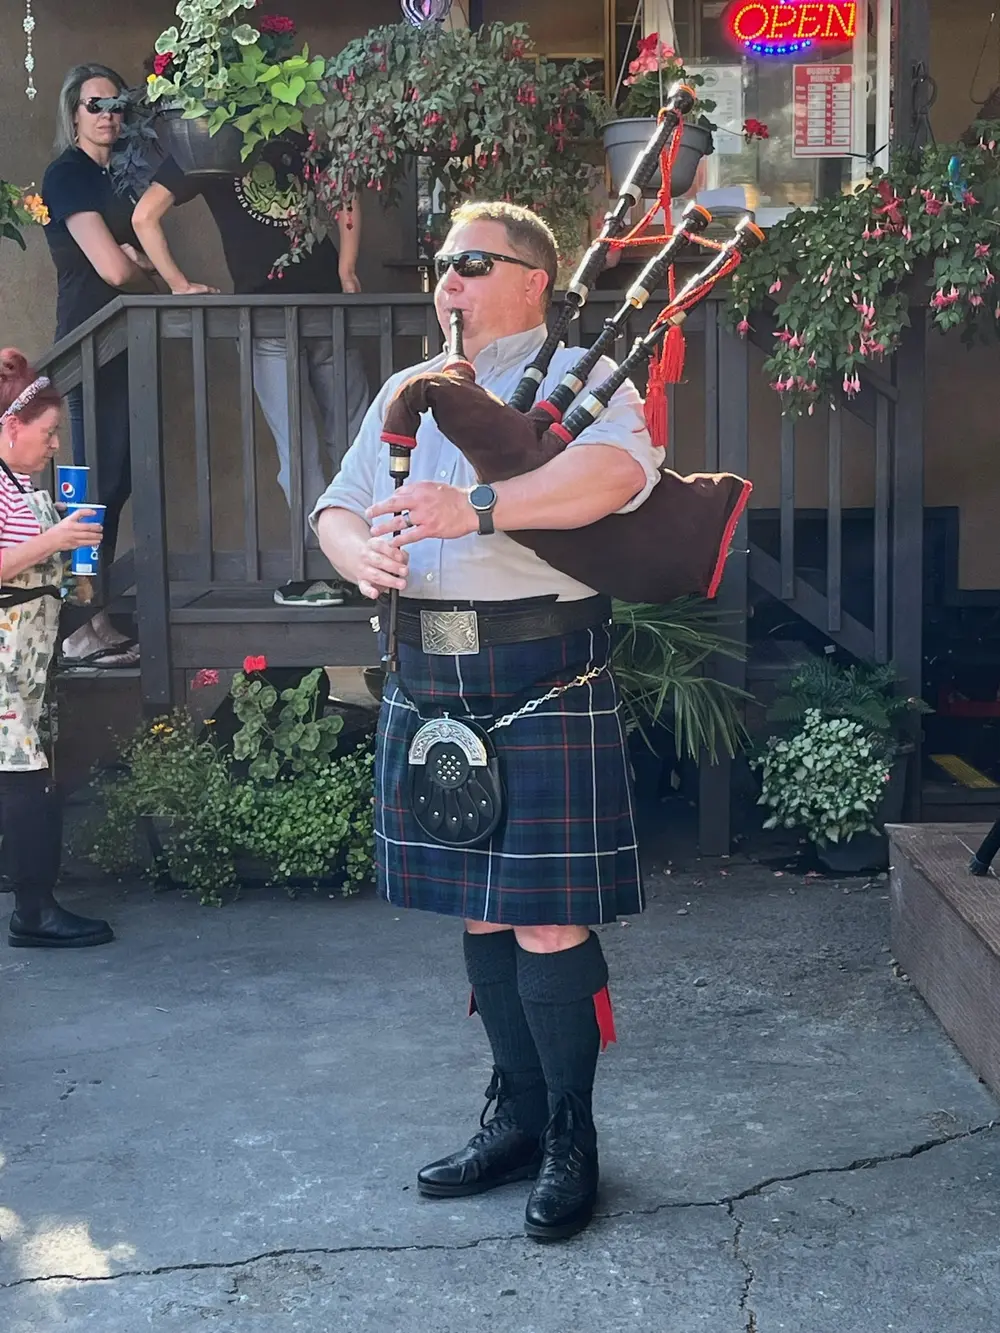 man in a kilt playing pipes